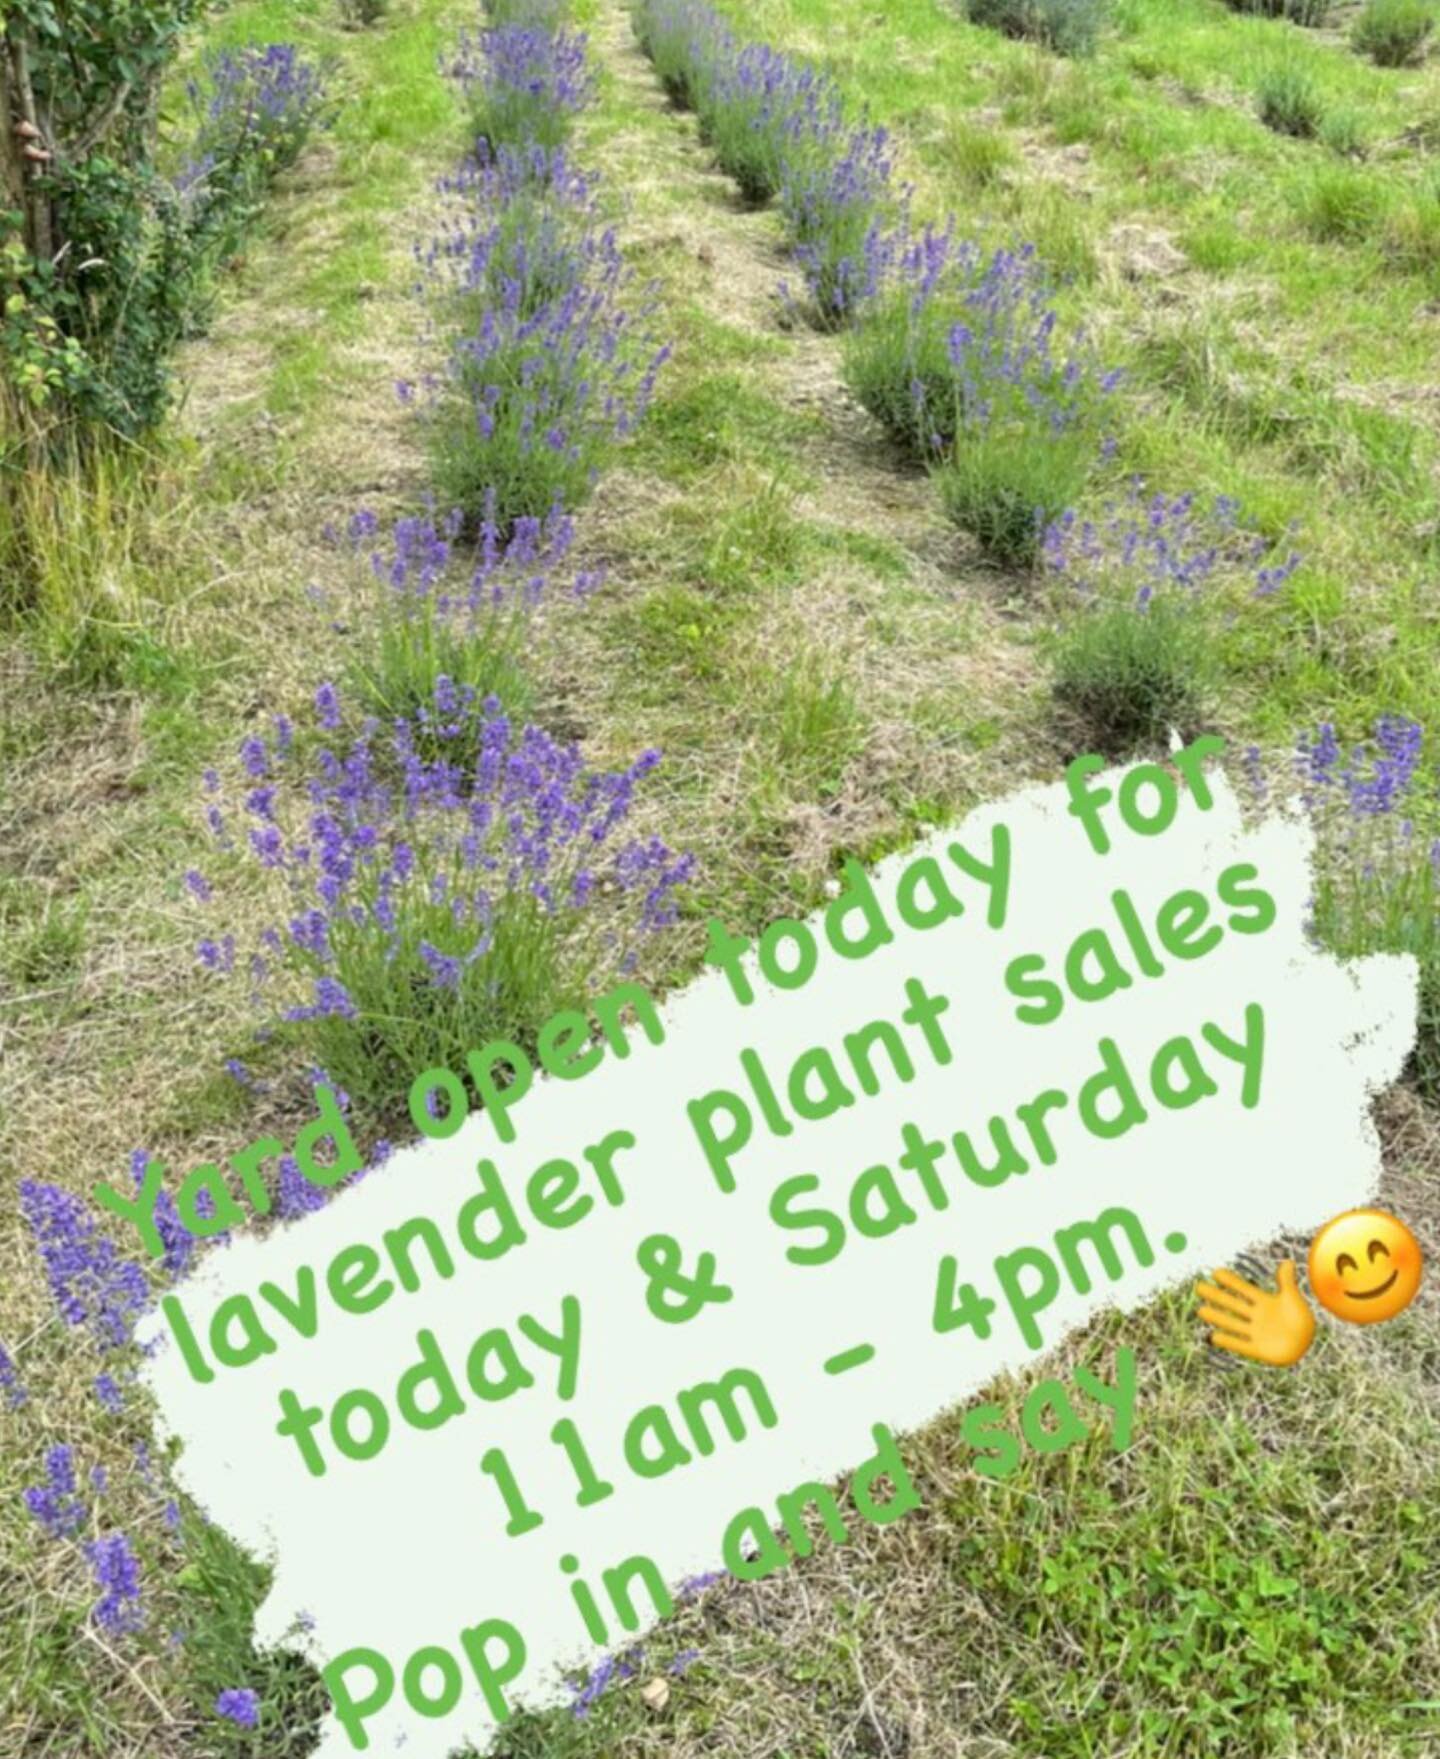 Yard open today for lavender plant sales. 11am - 4pm.
Pop in and say hello 😊
💜🌱💜🌱💜
#lavenderplants #lavender #lavenderfarm